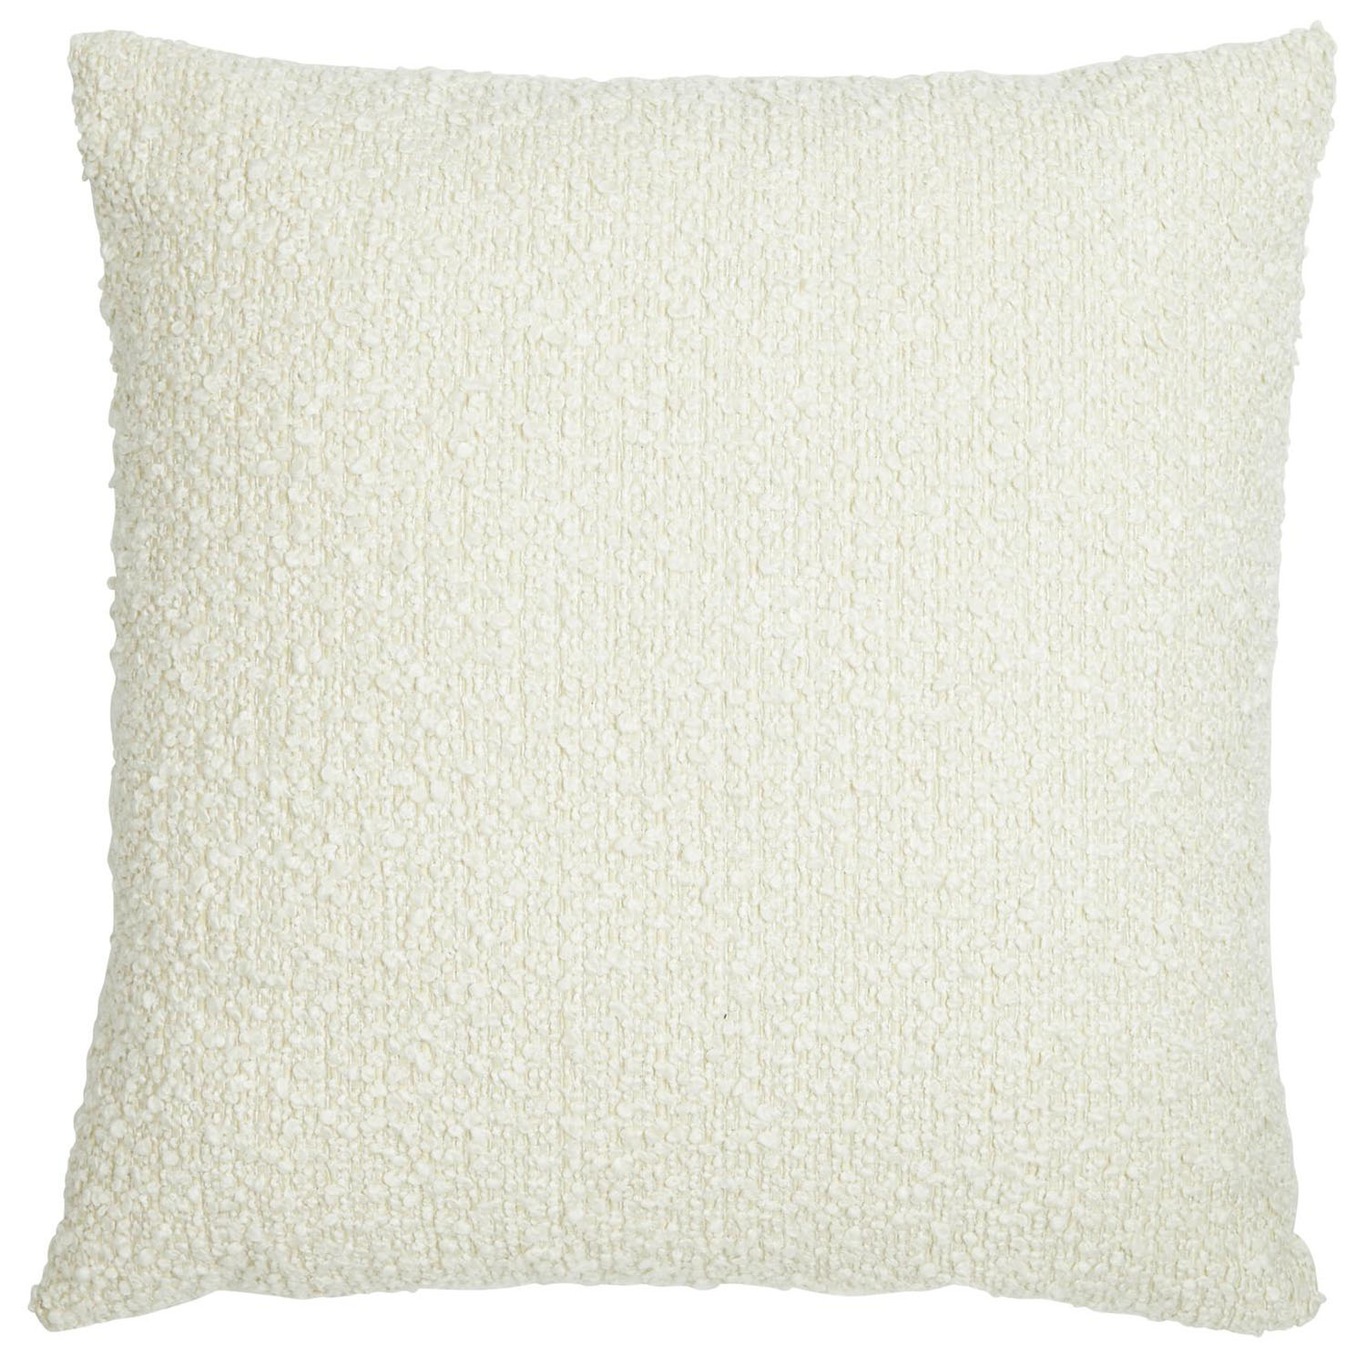 Boucle moment Kuddfodral 45X45 cm, Off-white